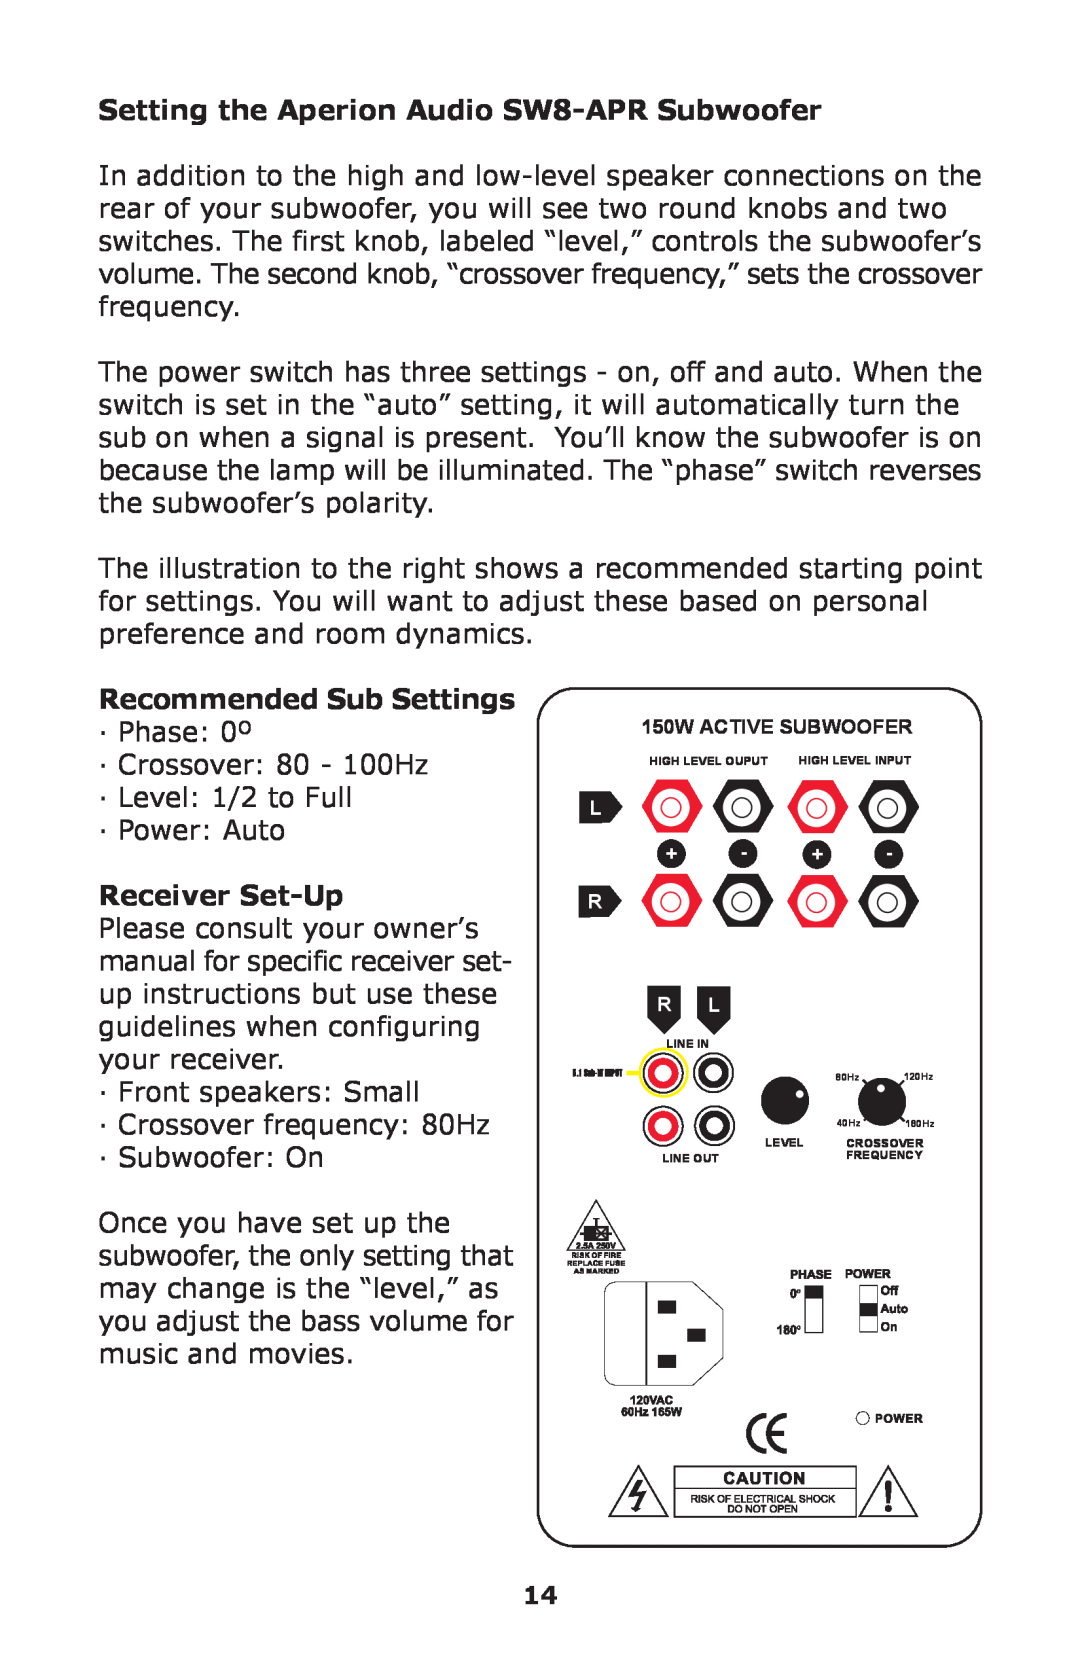 Aperion Audio SW-12 owner manual Setting the Aperion Audio SW8-APRSubwoofer, Recommended Sub Settings, Receiver Set-Up 